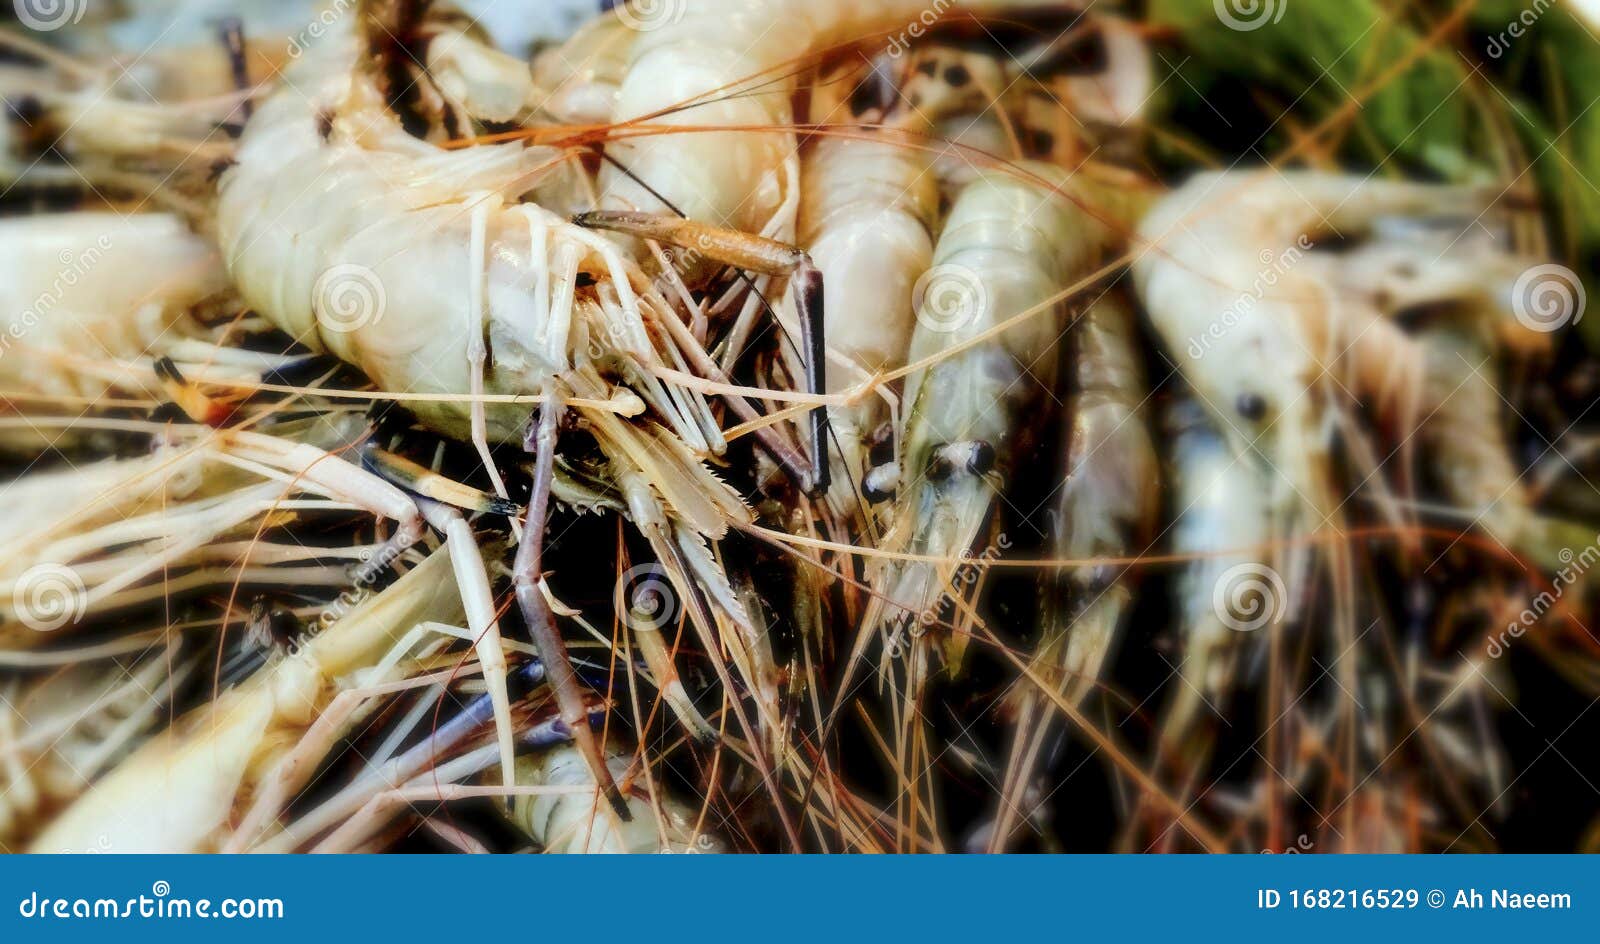 Heap of Golden White Shrimps Prawn Lobster Seafood for Sale in